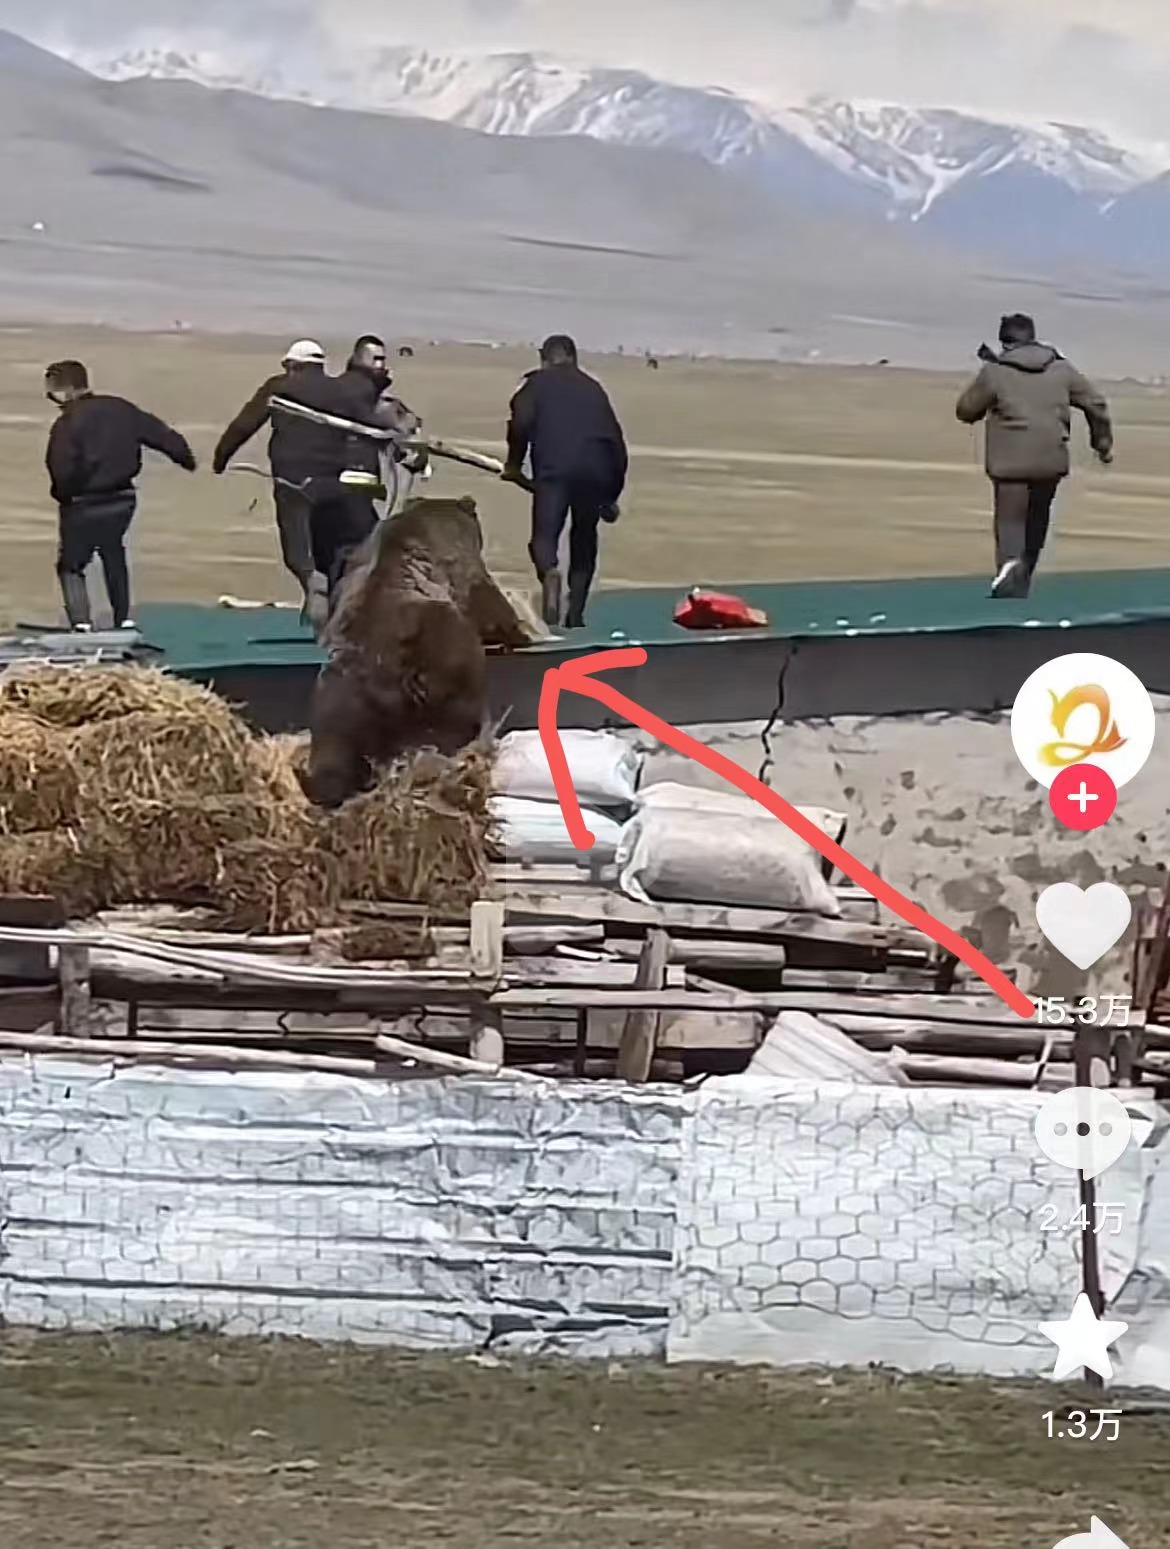 Screenshot of a video on Chinese social media platform Douyin shows a bear chasing people. /CGTN